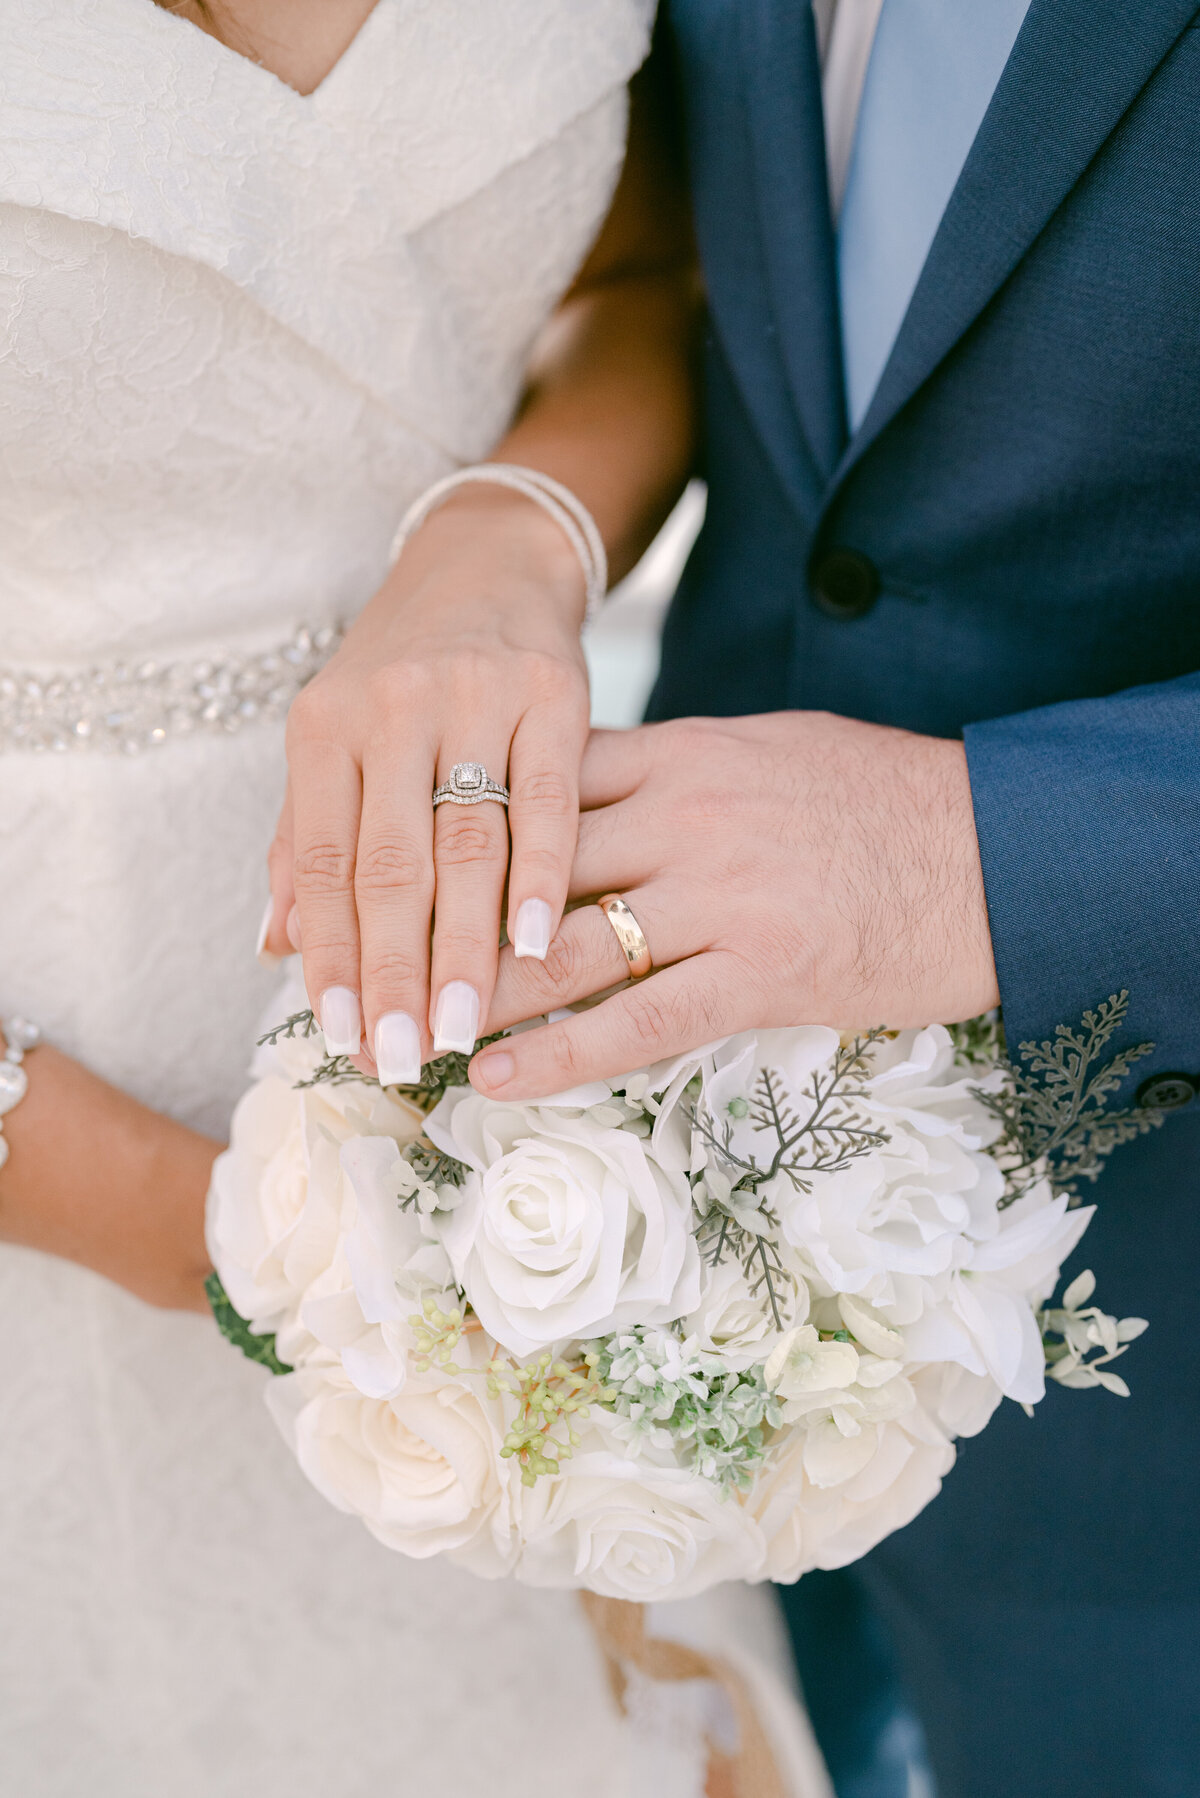 Detail of the rings with the bouquet